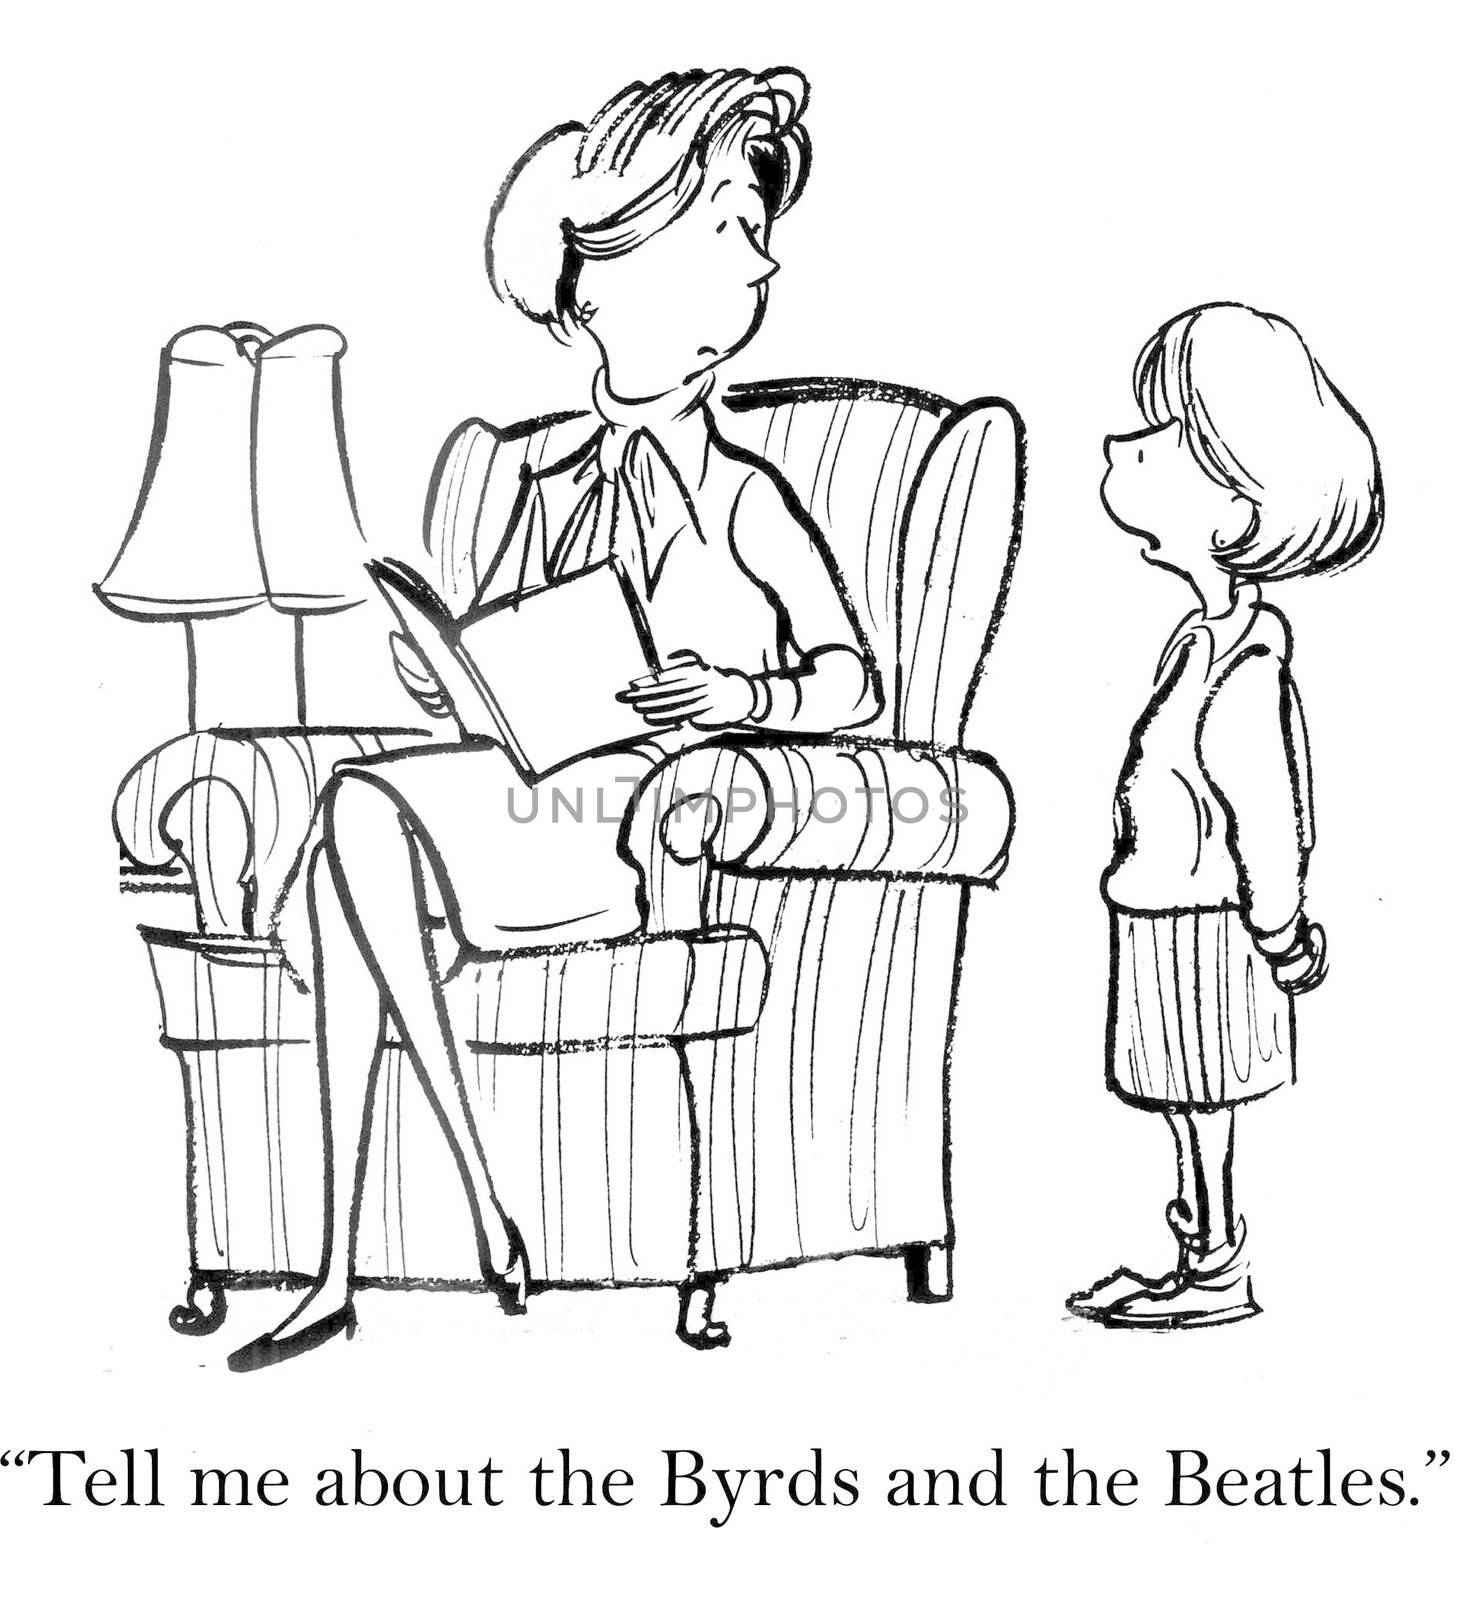 "Tell me about the Byrds and the Beatles."